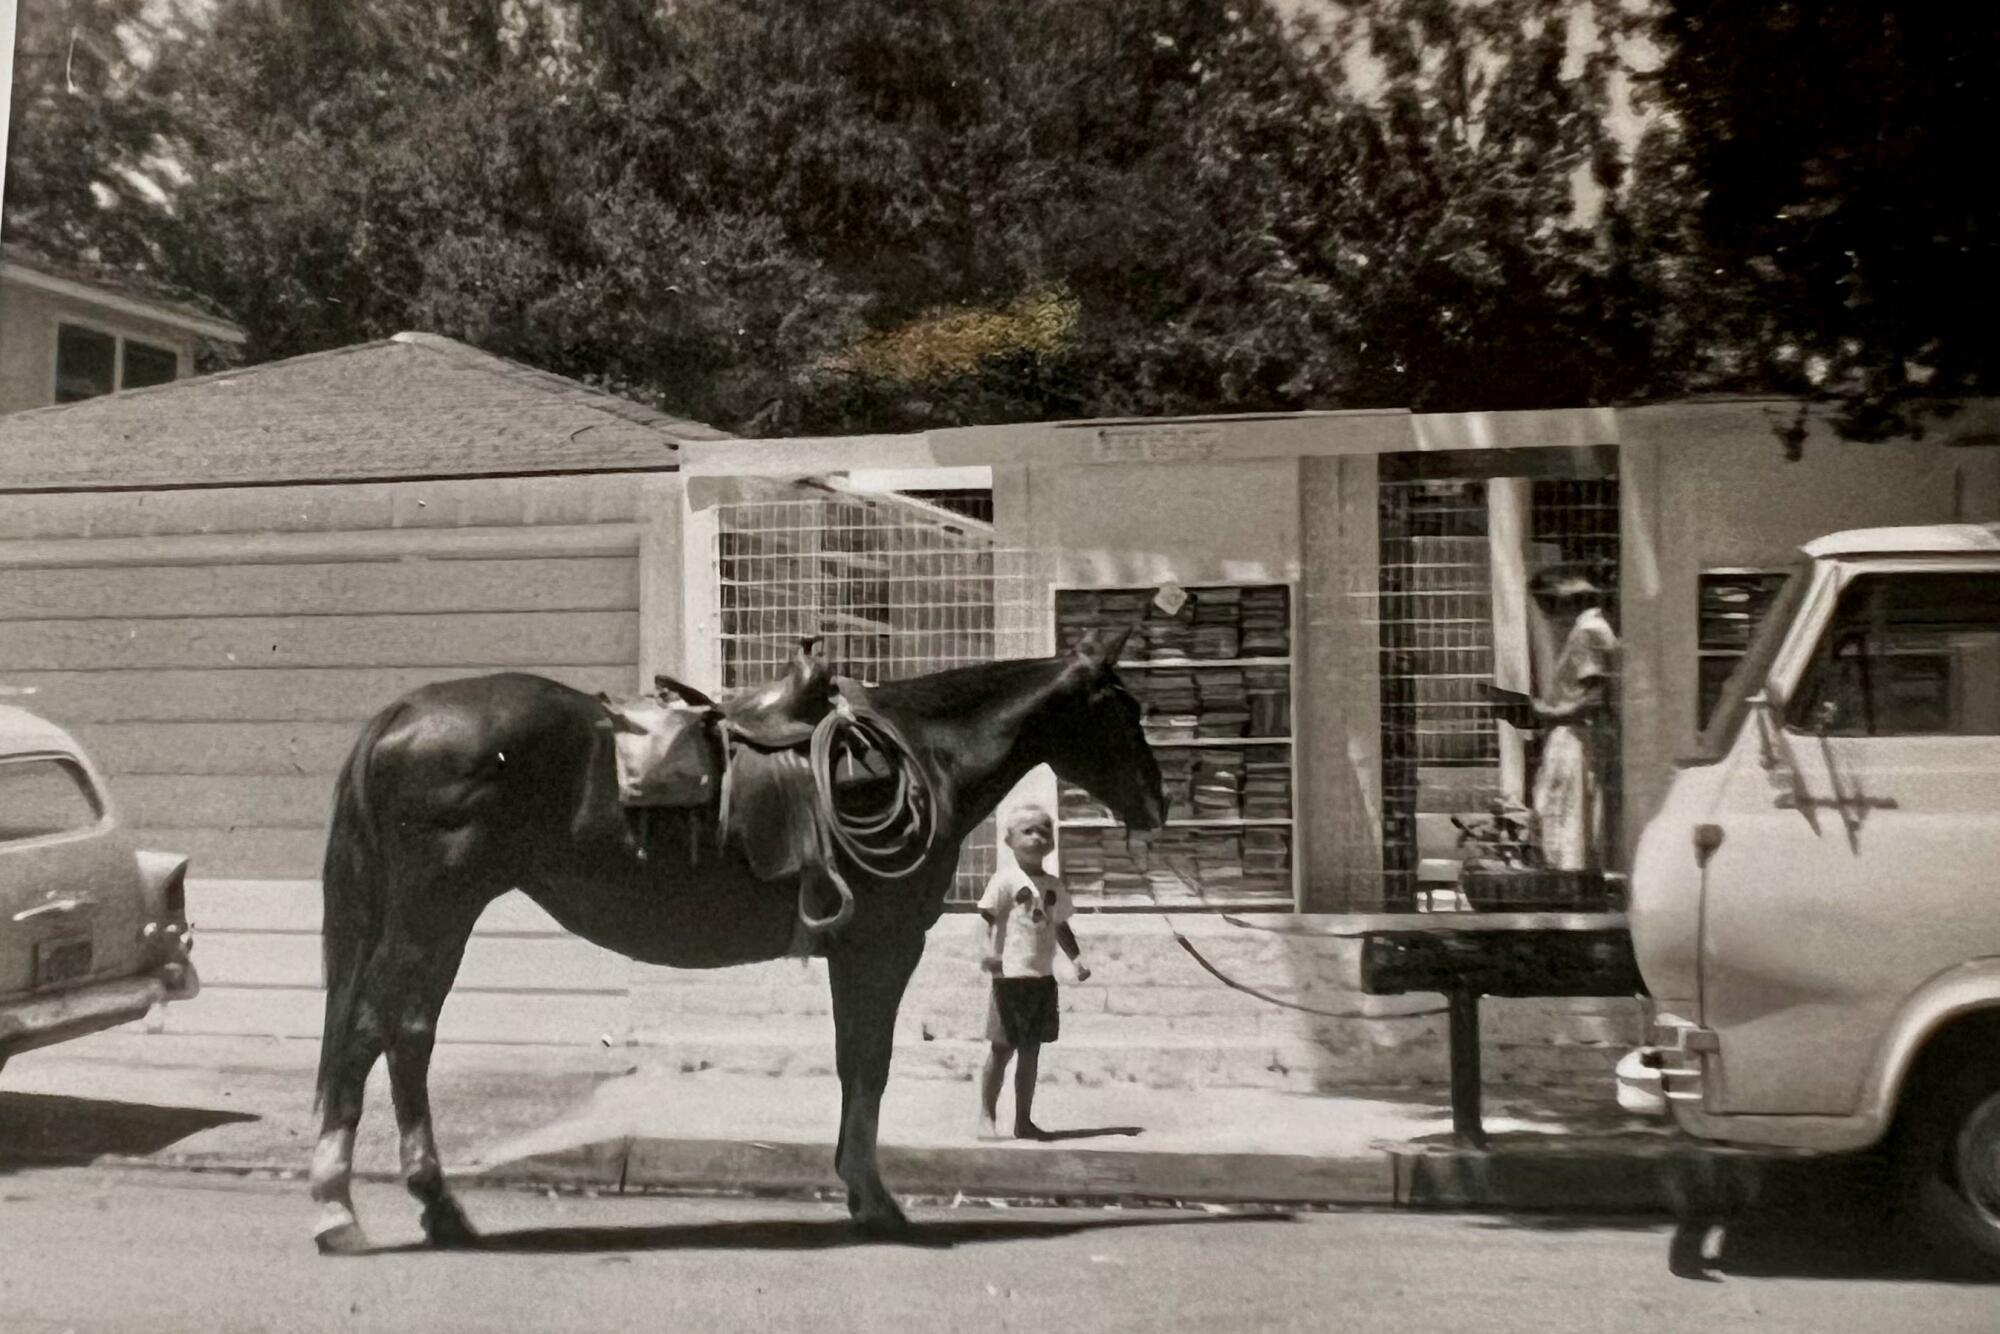 A black-and-white photo of a small child next to a horse hitched outside Bart's Books.